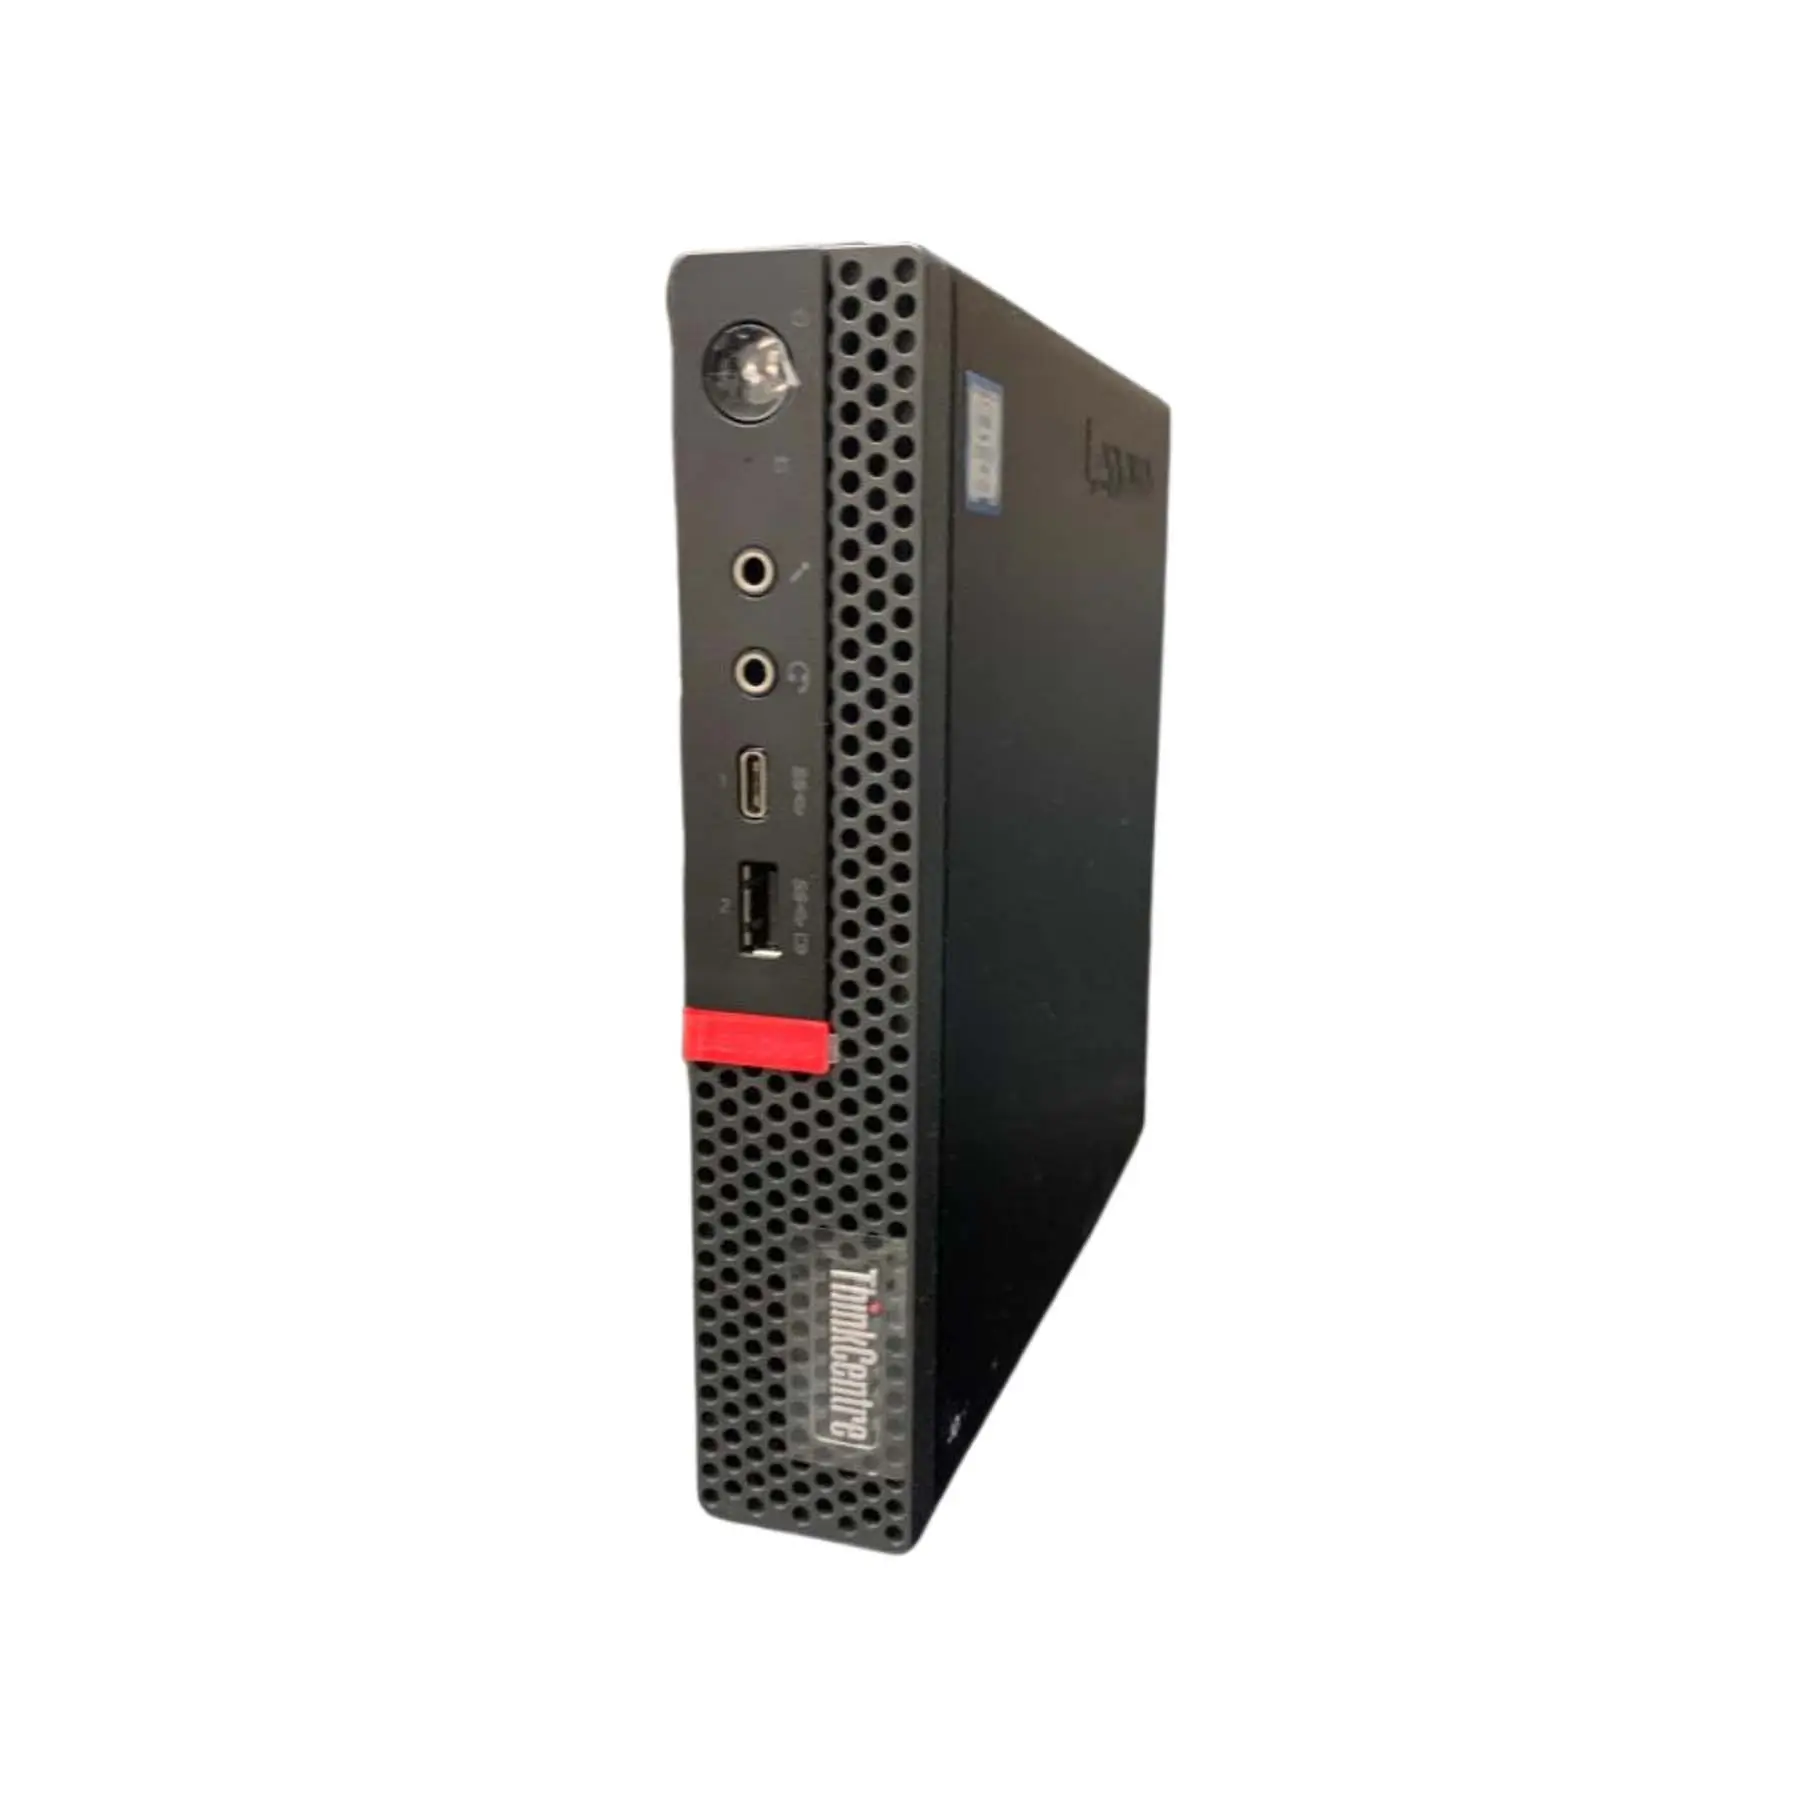 High Performance Reliable Computer ThinkCentre M920q USDT Used Refurbished Slim Desktop Bulk Sale from Malaysia